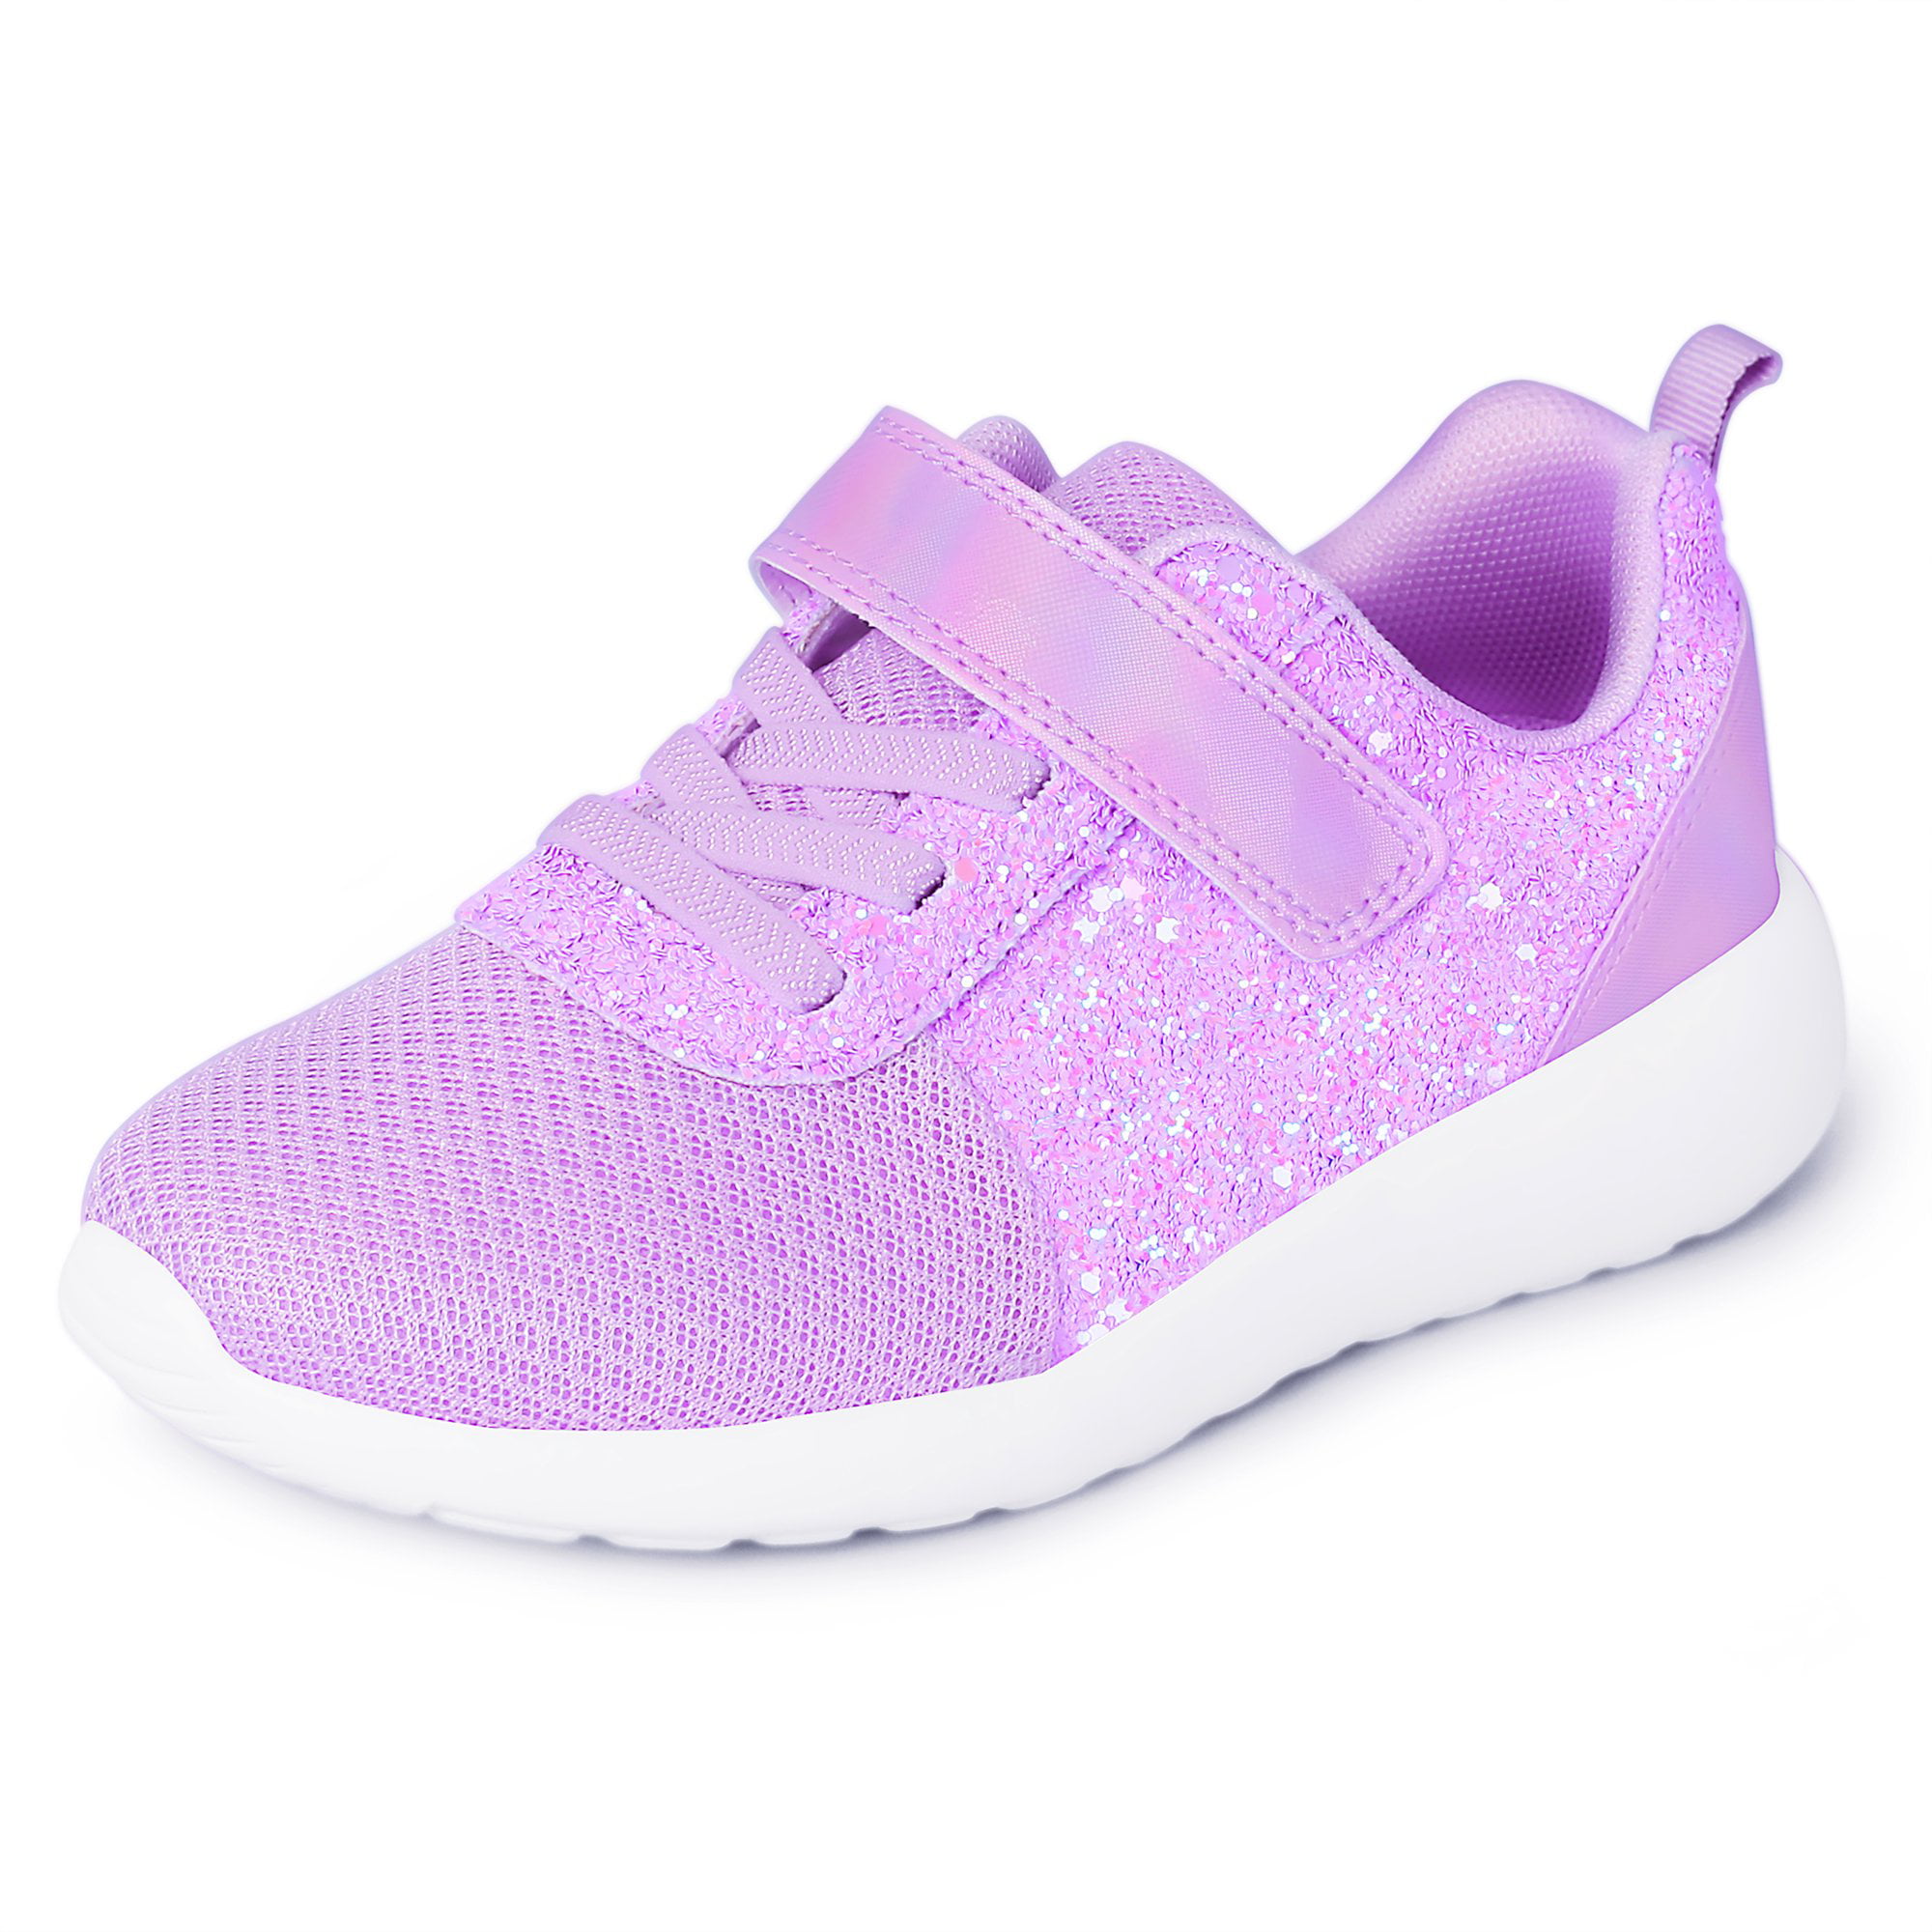 Girls Boys Kids Trainers Glitter Shoes Children Toddler Running Shoes Size4.5-11 